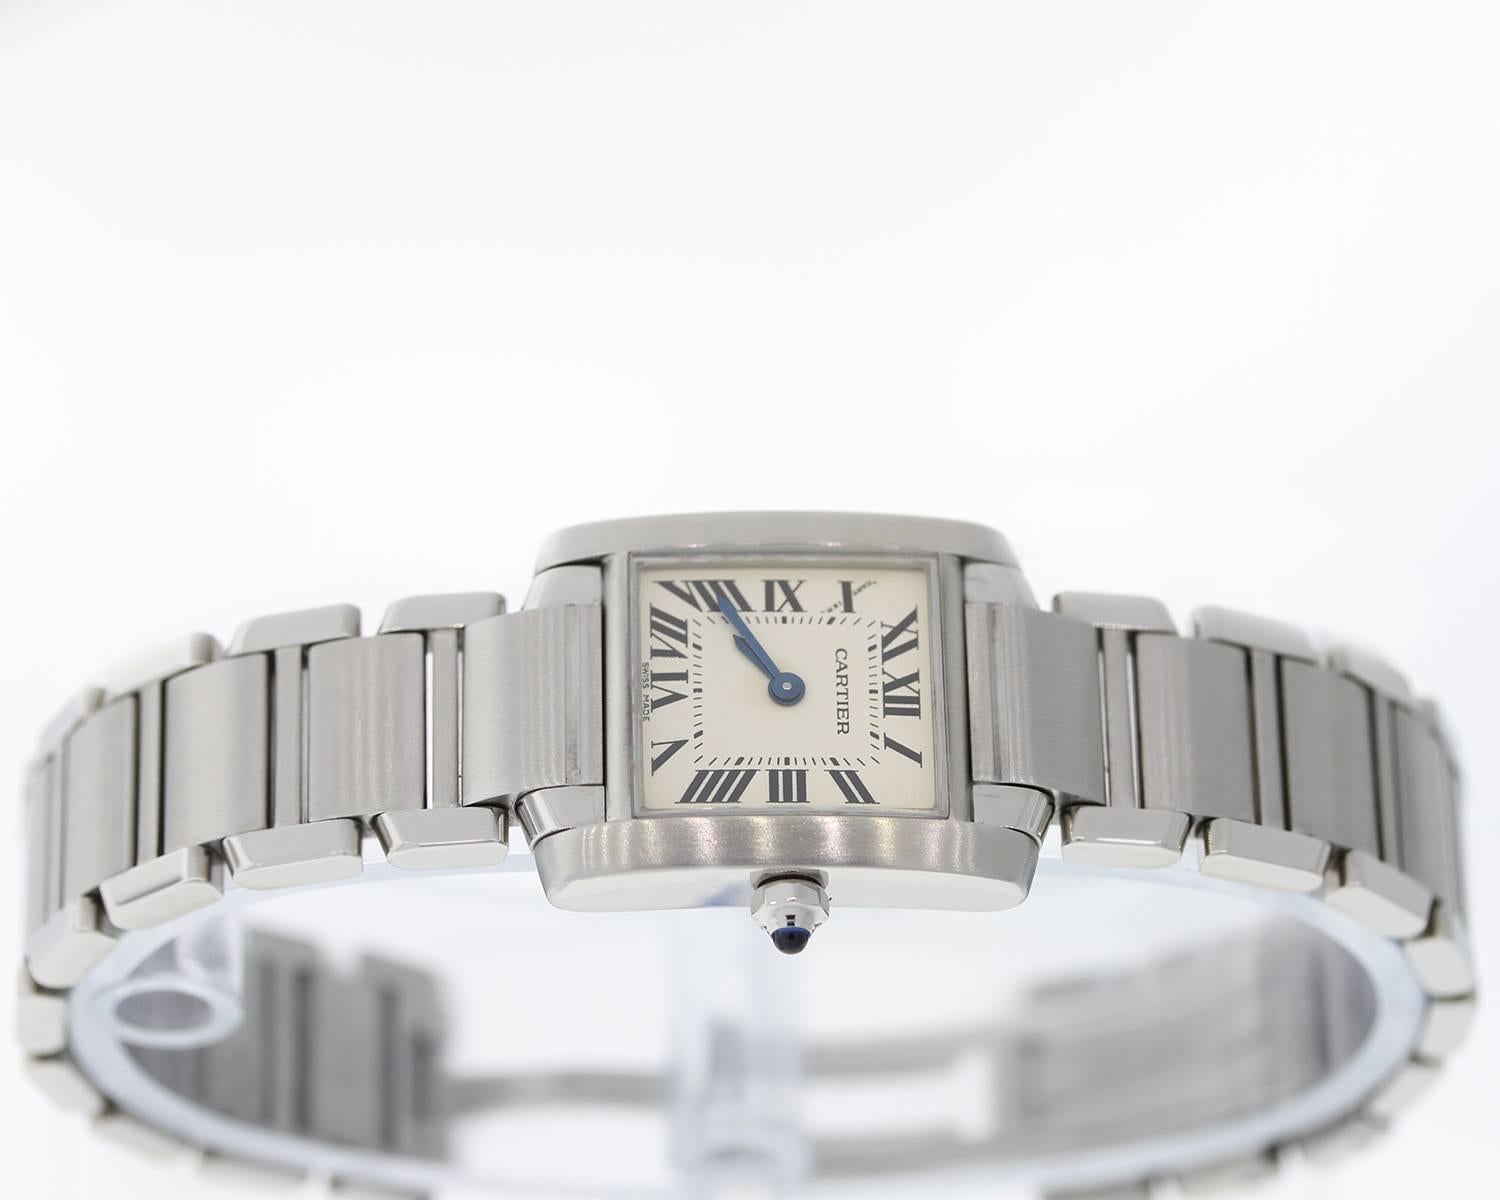 Brand Name: Cartier
Style Number: 31888
Style Name: Tank Francaise
Color Name (Dial): Ivory Roman
Country of Manufacture: Switzerland
Gender: Womens
Strap Material: Stainless Steel
Case Metal: Stainless Steel
Movement Type: Quartz
Crystal